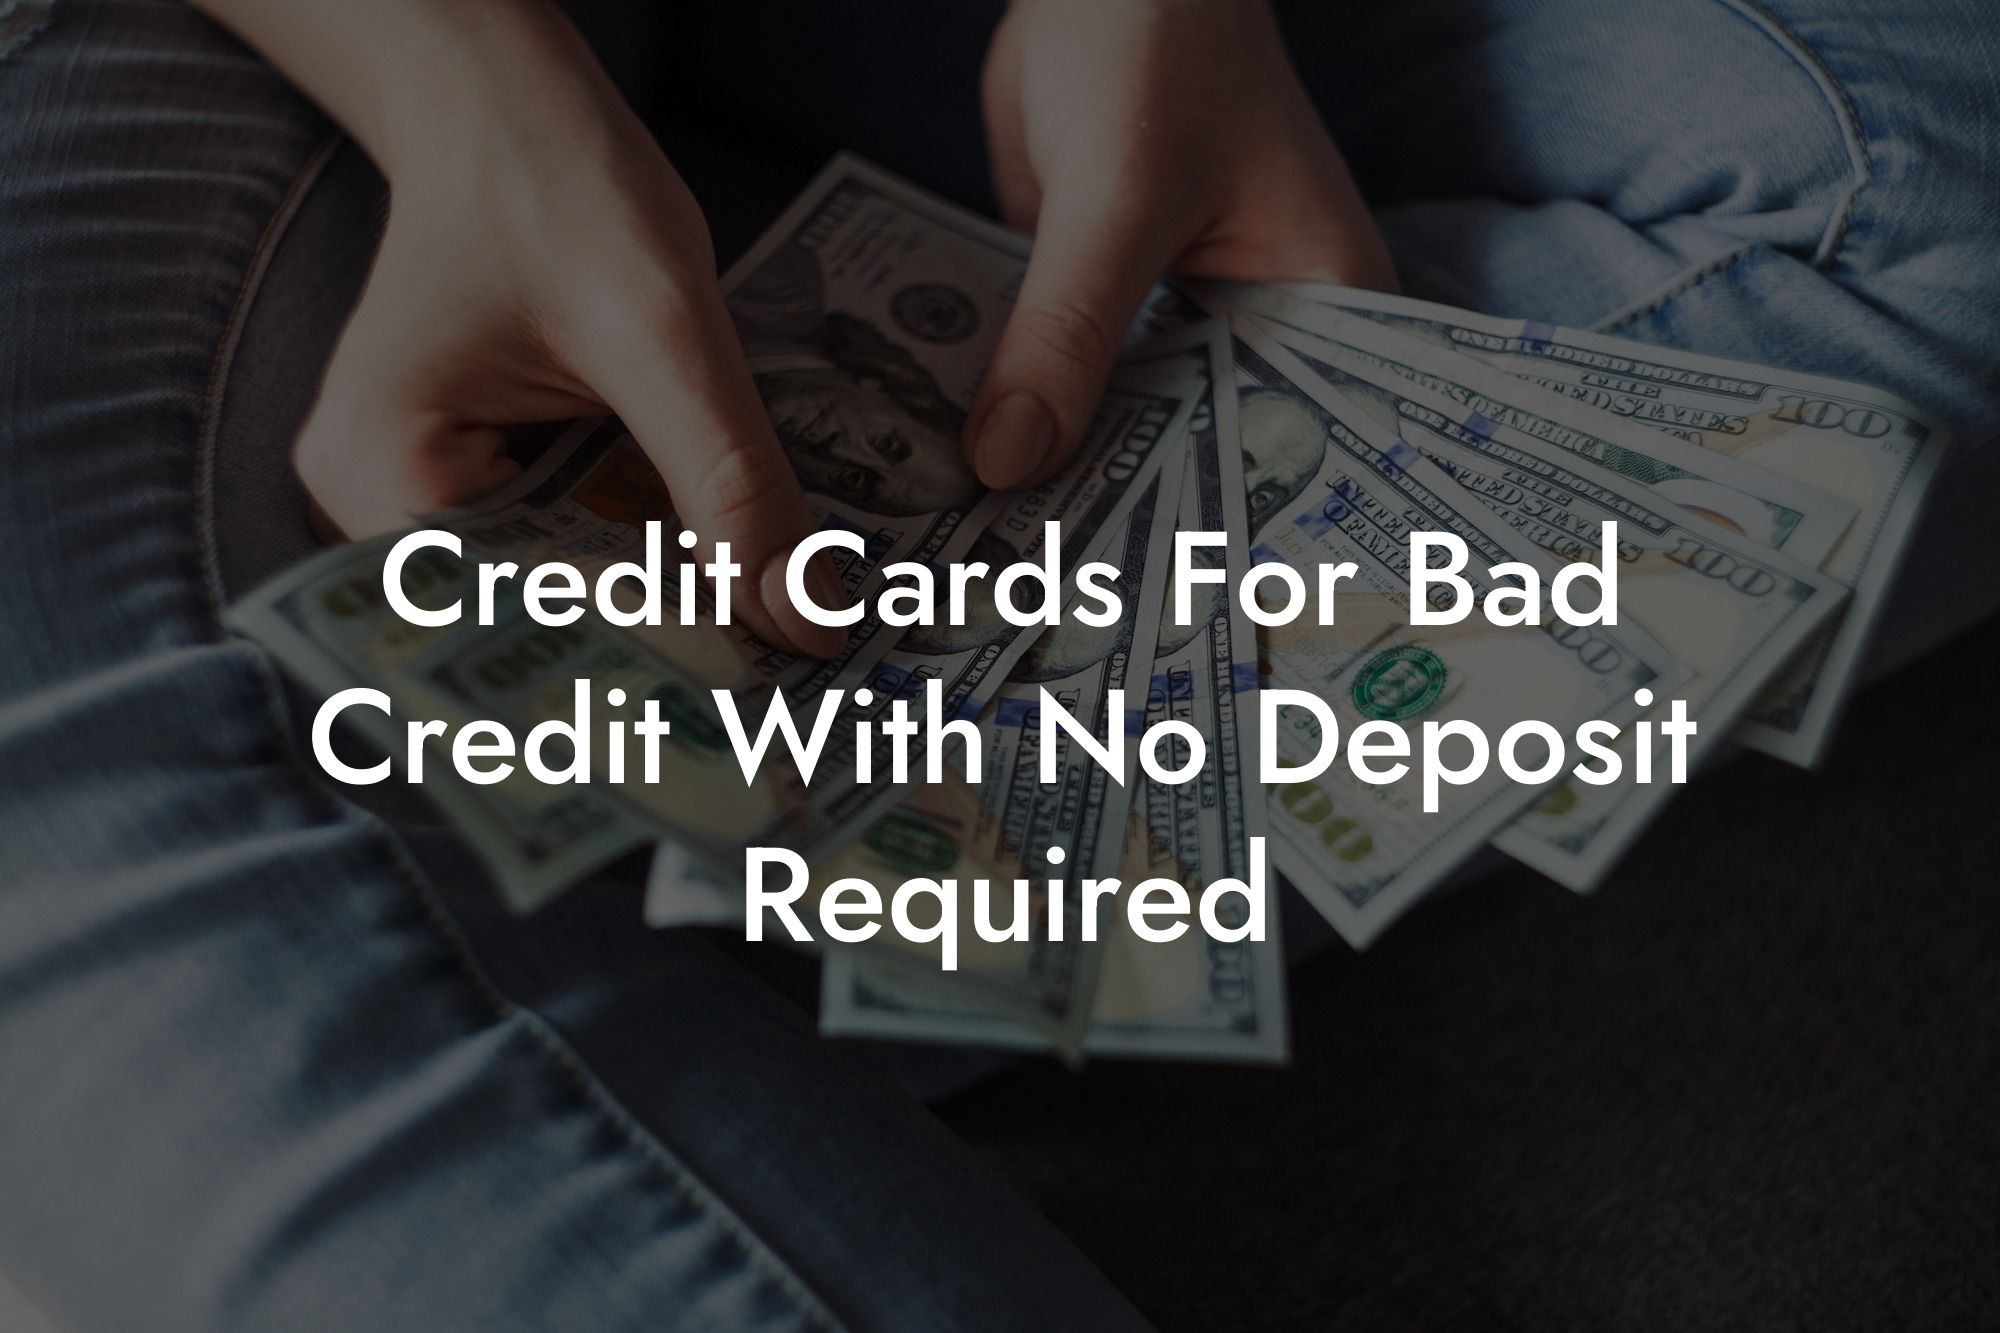 Credit Cards For Bad Credit With No Deposit Required